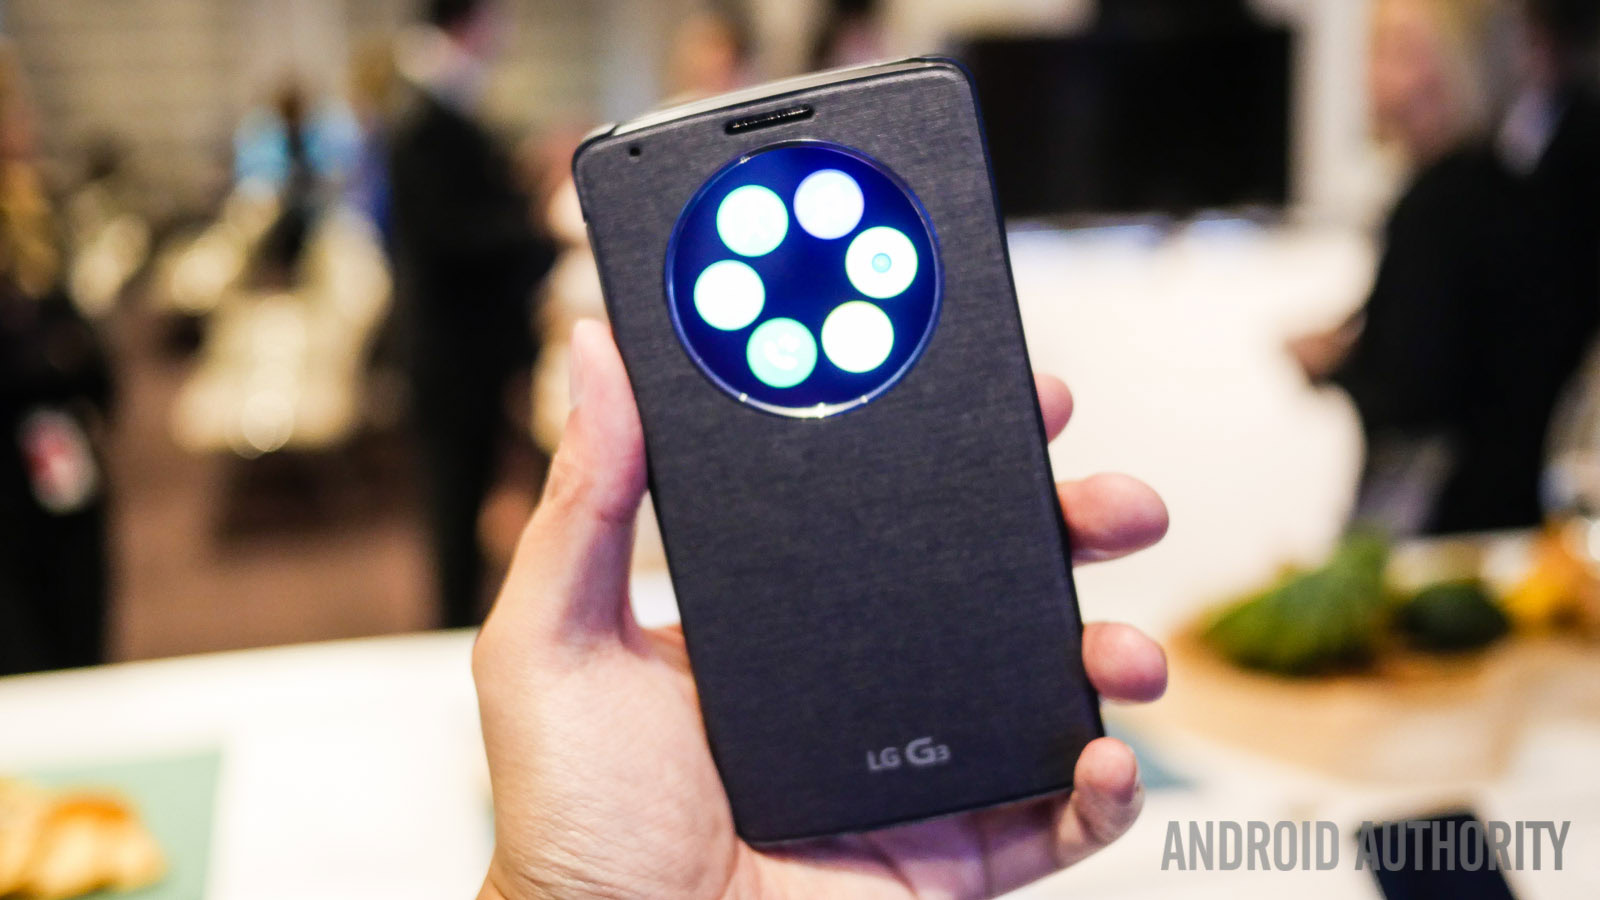 lg g3 hands on (23 of 31)